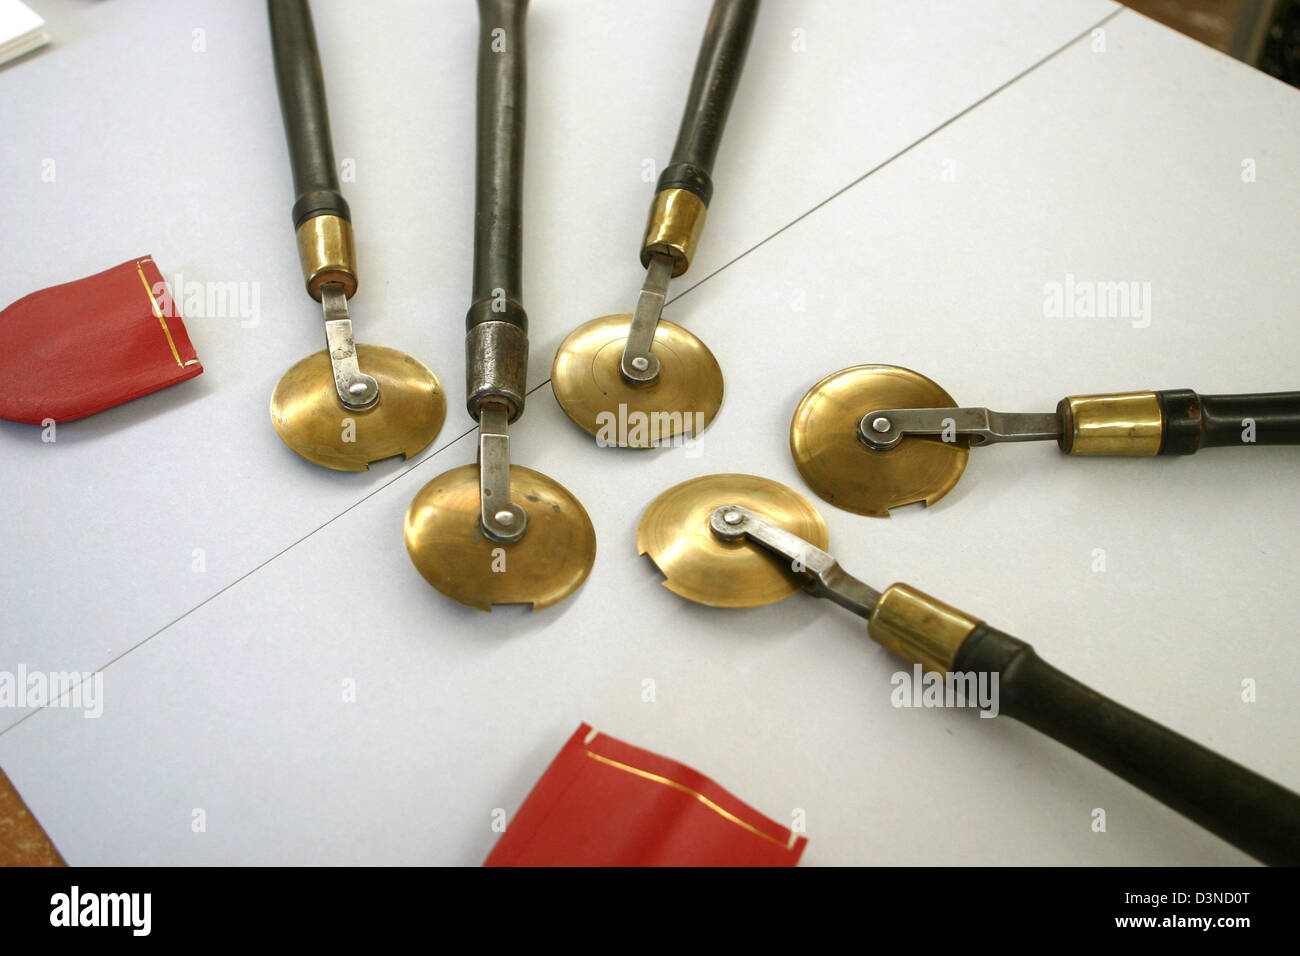 Various Book Binding Tools Use By Stock Photo 184695161